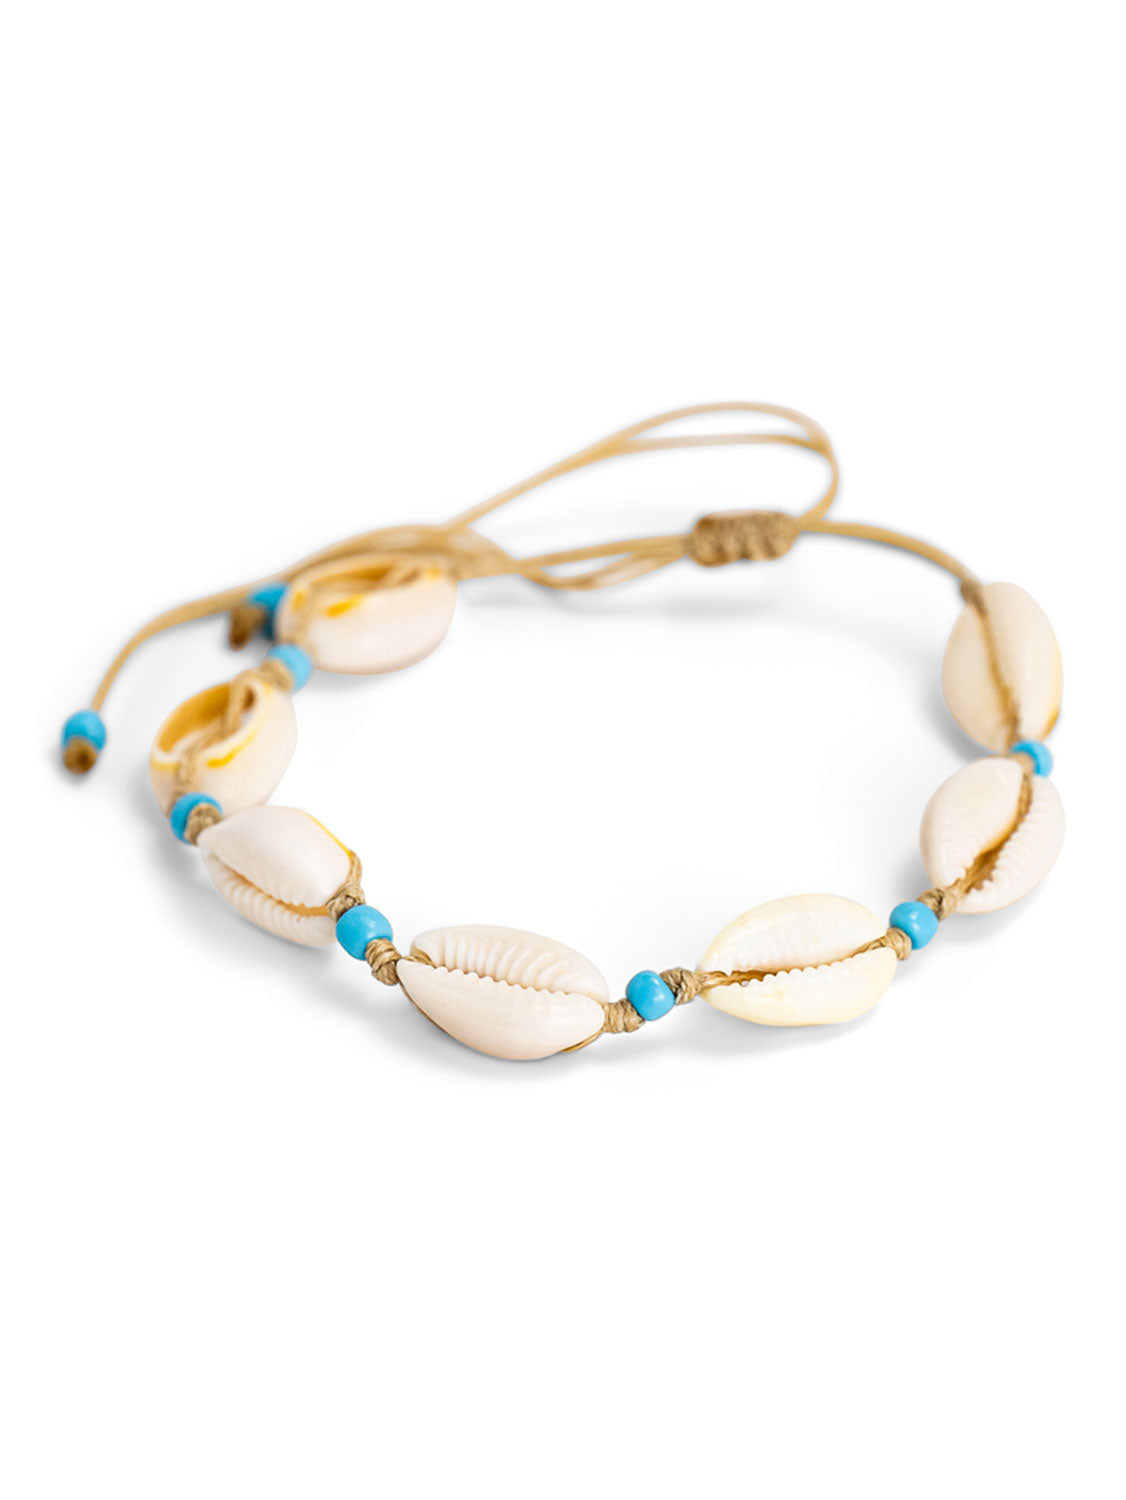 Small White Cowrie Shell And Blue Bead Anklet